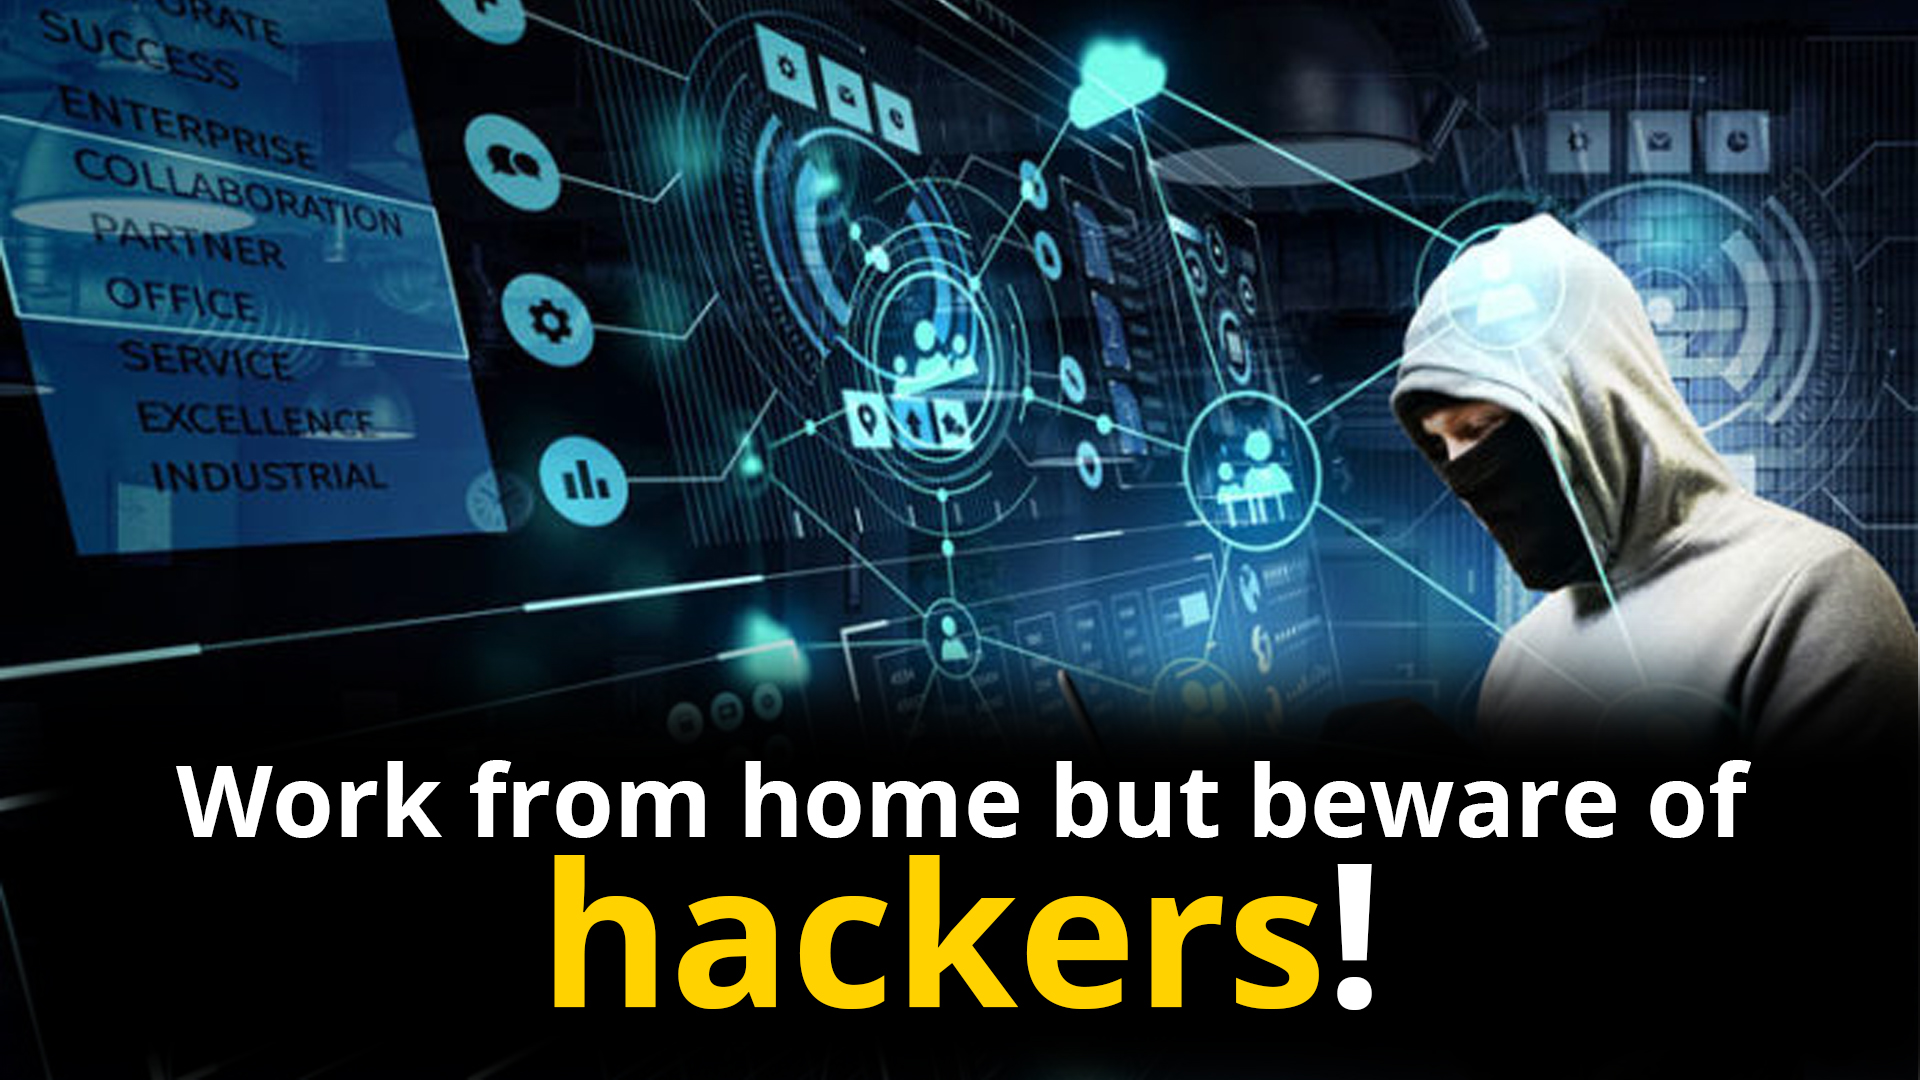 Work from home but beware of hackers!